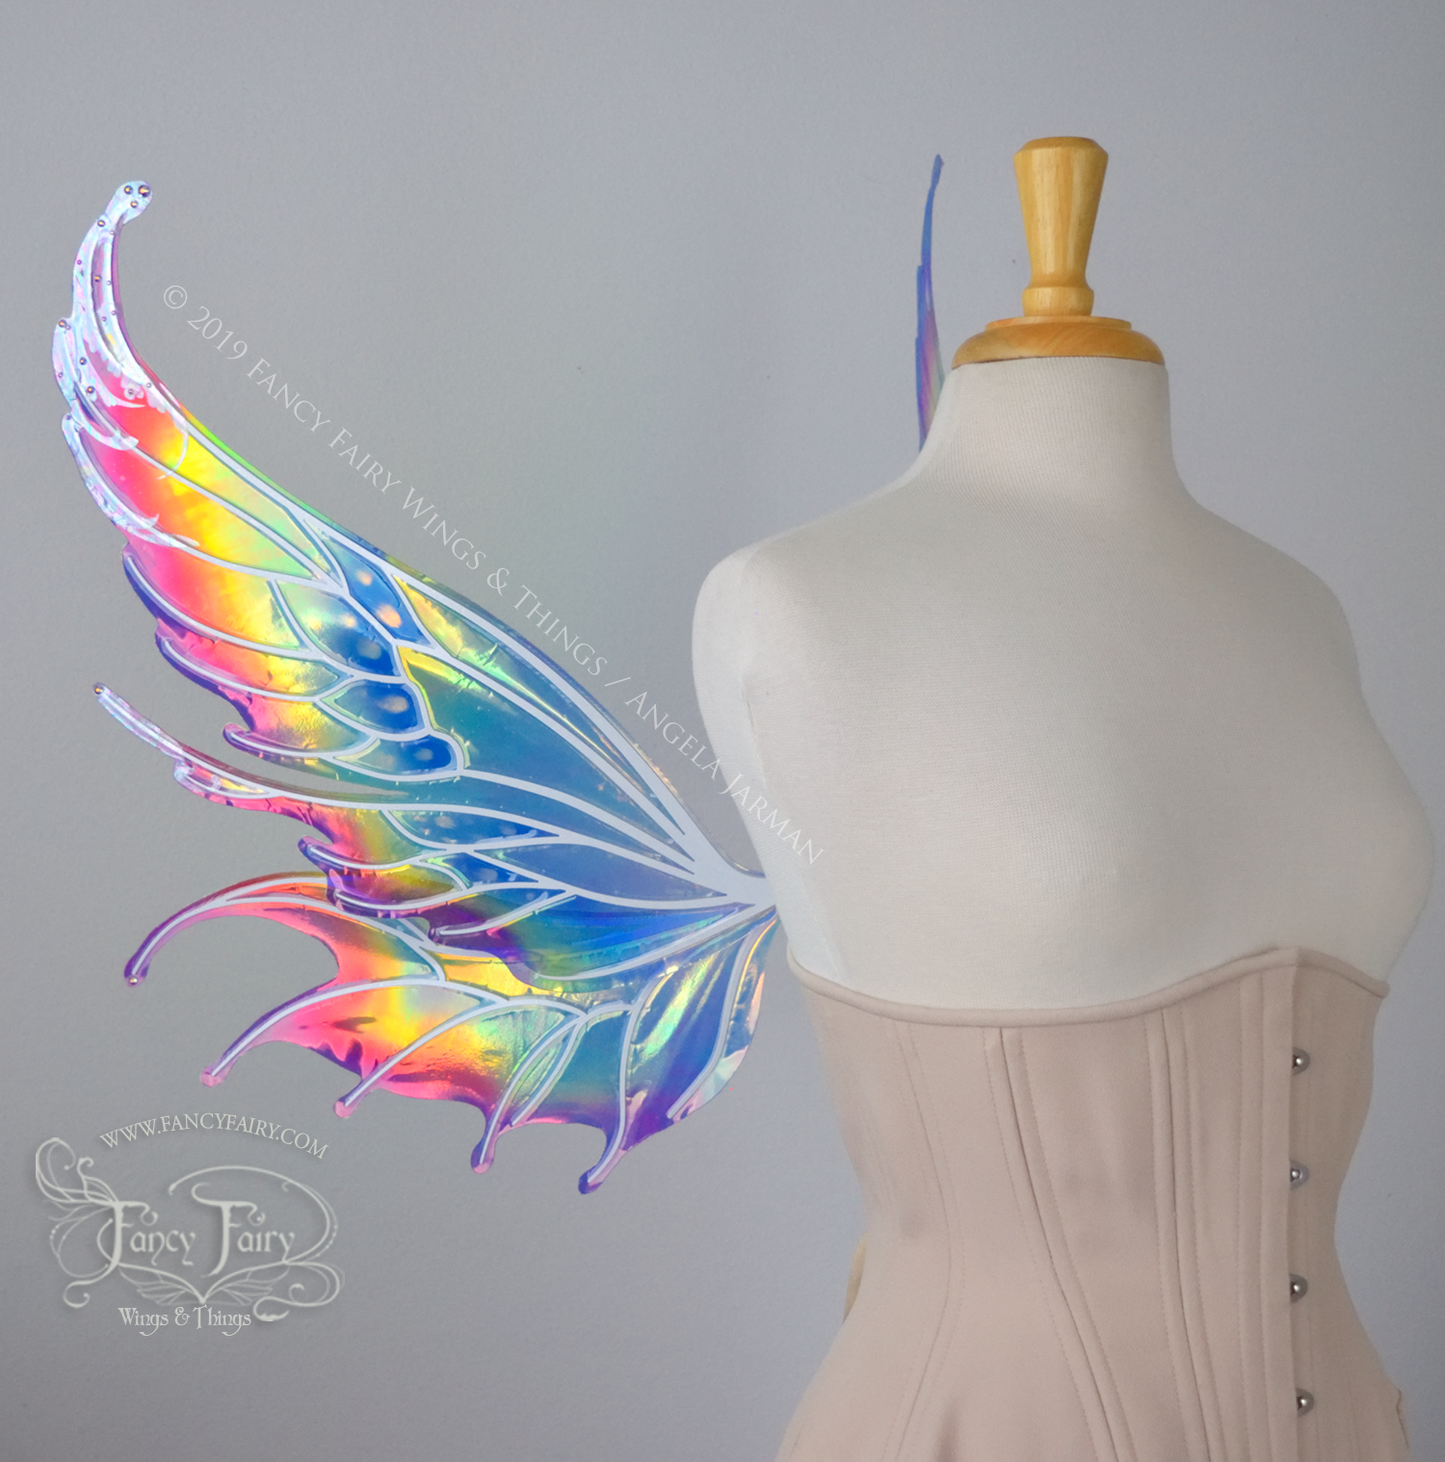 Aquatica Rainbow Iridescent Convertible Fairy Wings with Opal Foil & Swarovski Crystals